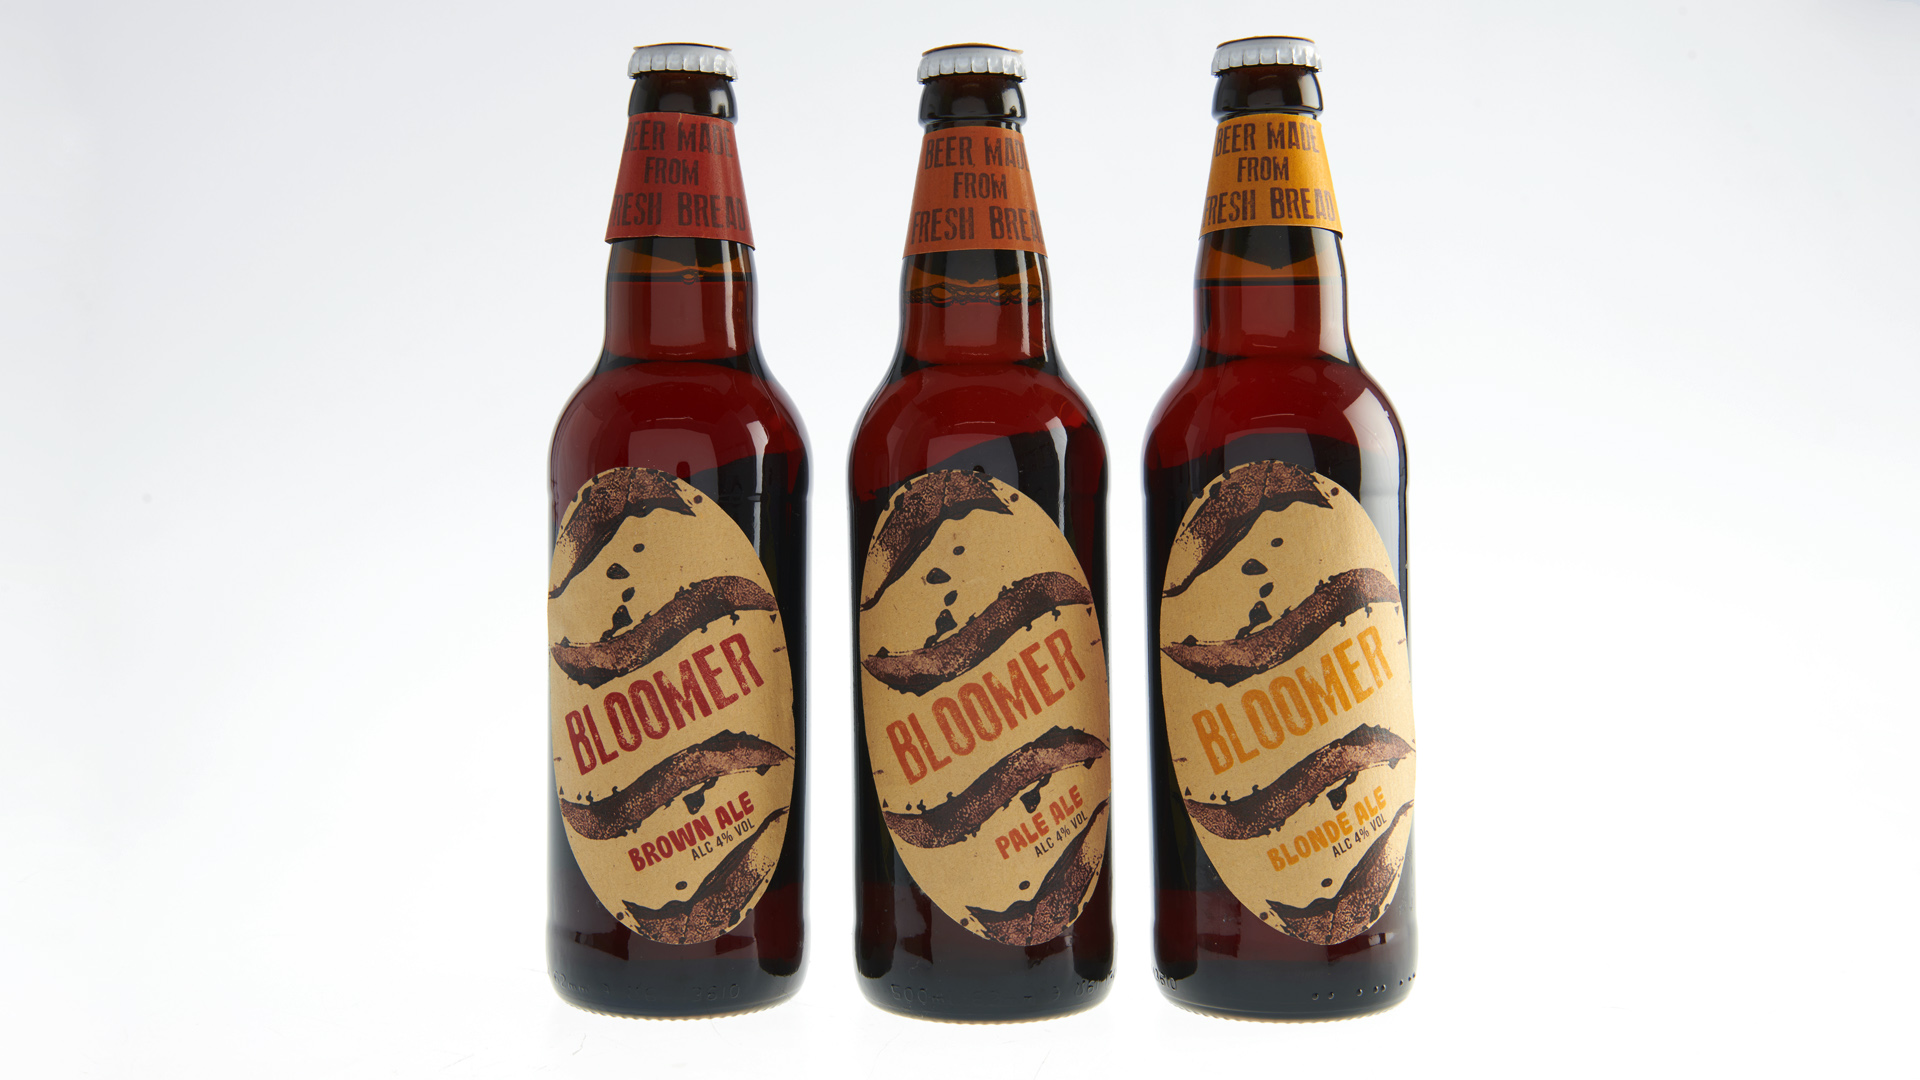 BA Graphic Design work by Megan Pearce showing beer bottles for the brand Bloomer.